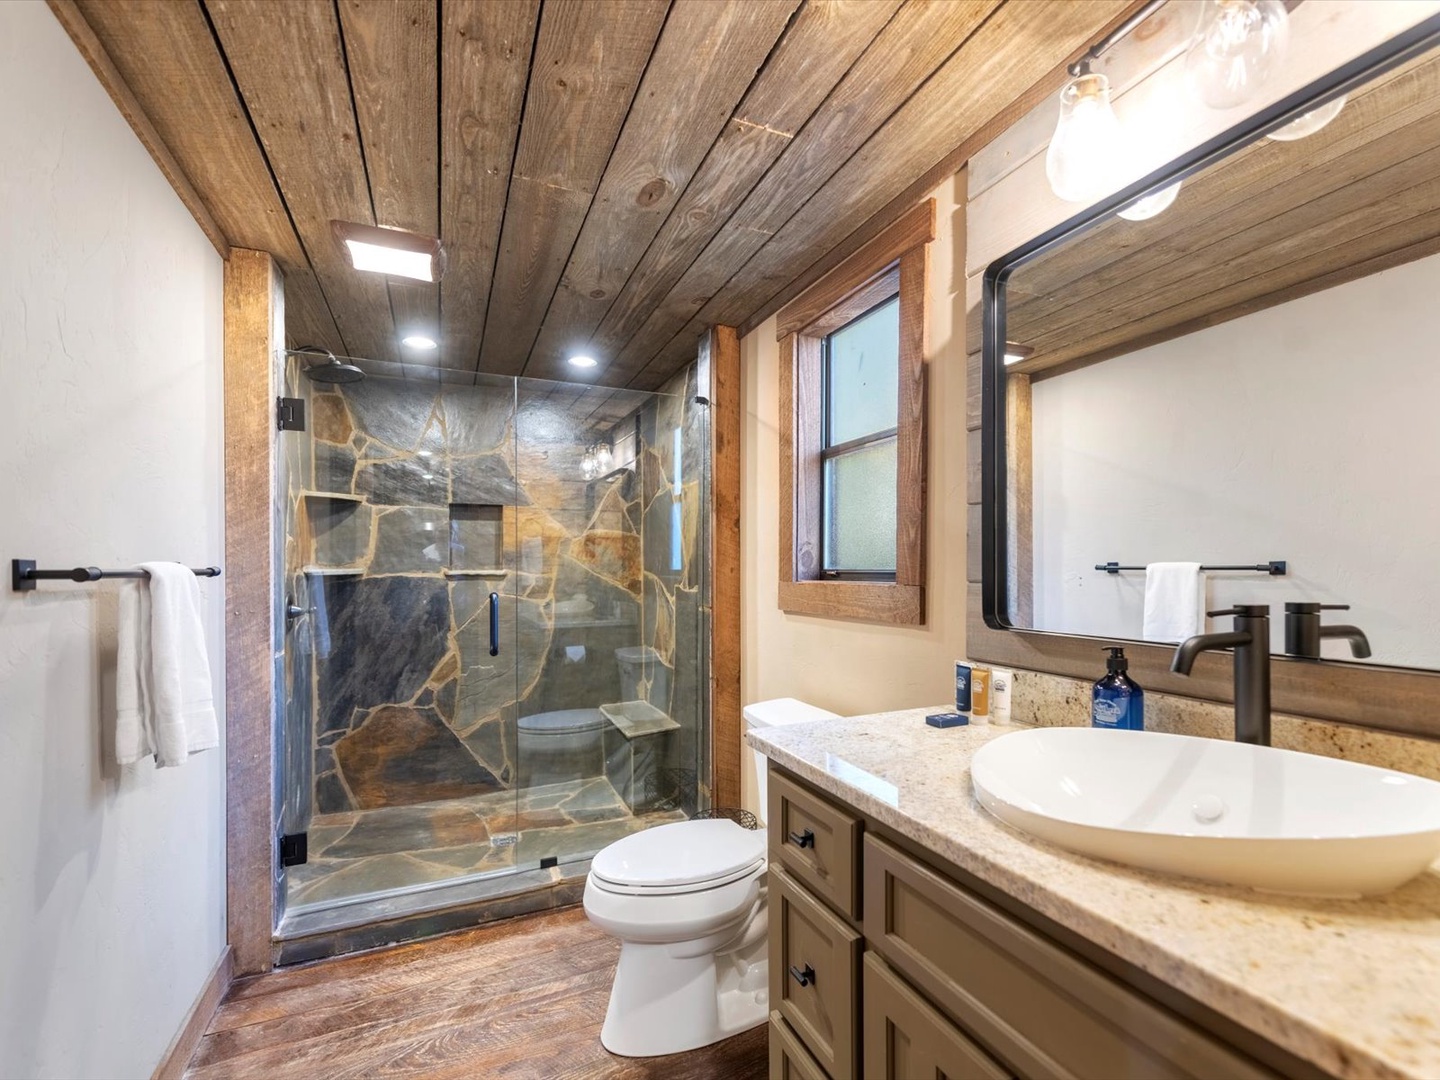 A Little Stoney River - Entry Level Queen Bedroom's Bathroom